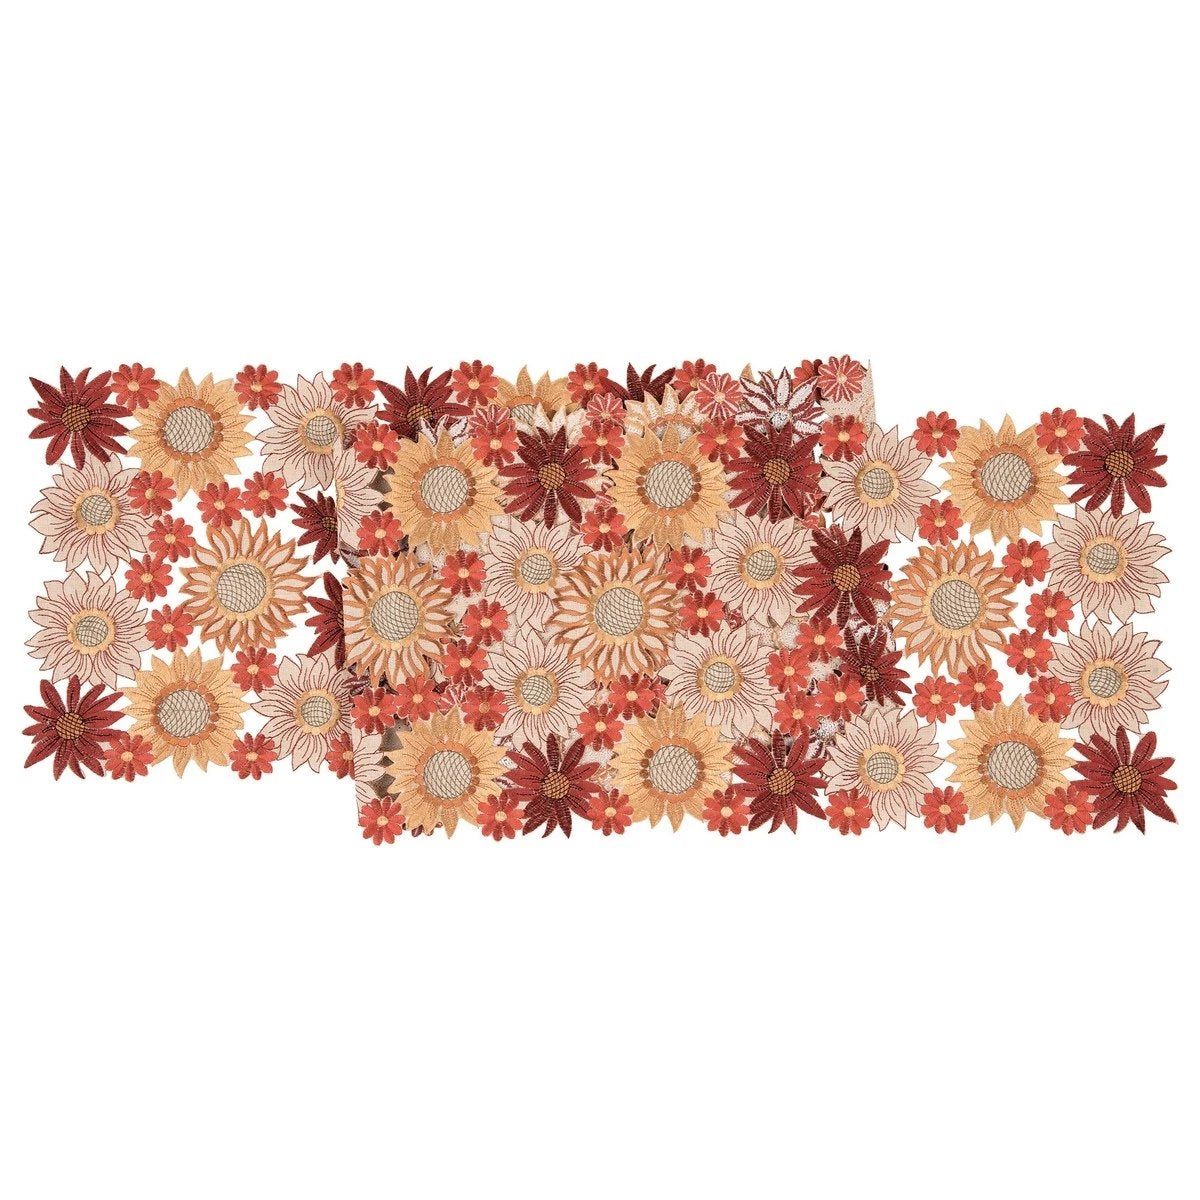 Fall Flowers Table Runner with embriodered sunflowers and mums